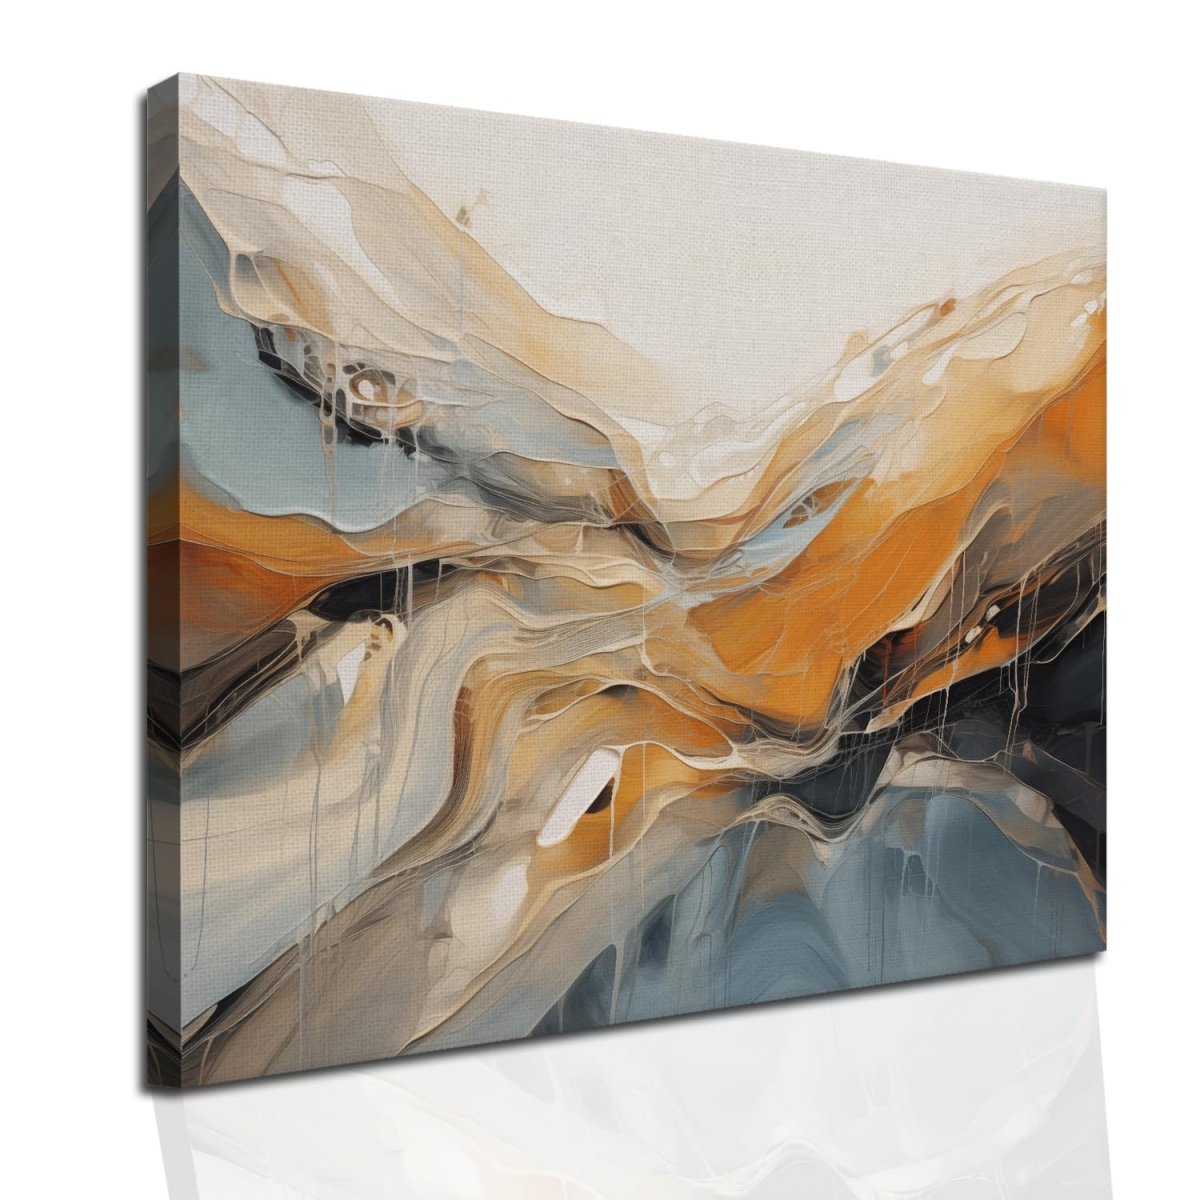 The Cosmic Ripple Canvas Wall Art (48 x 36 Inches)